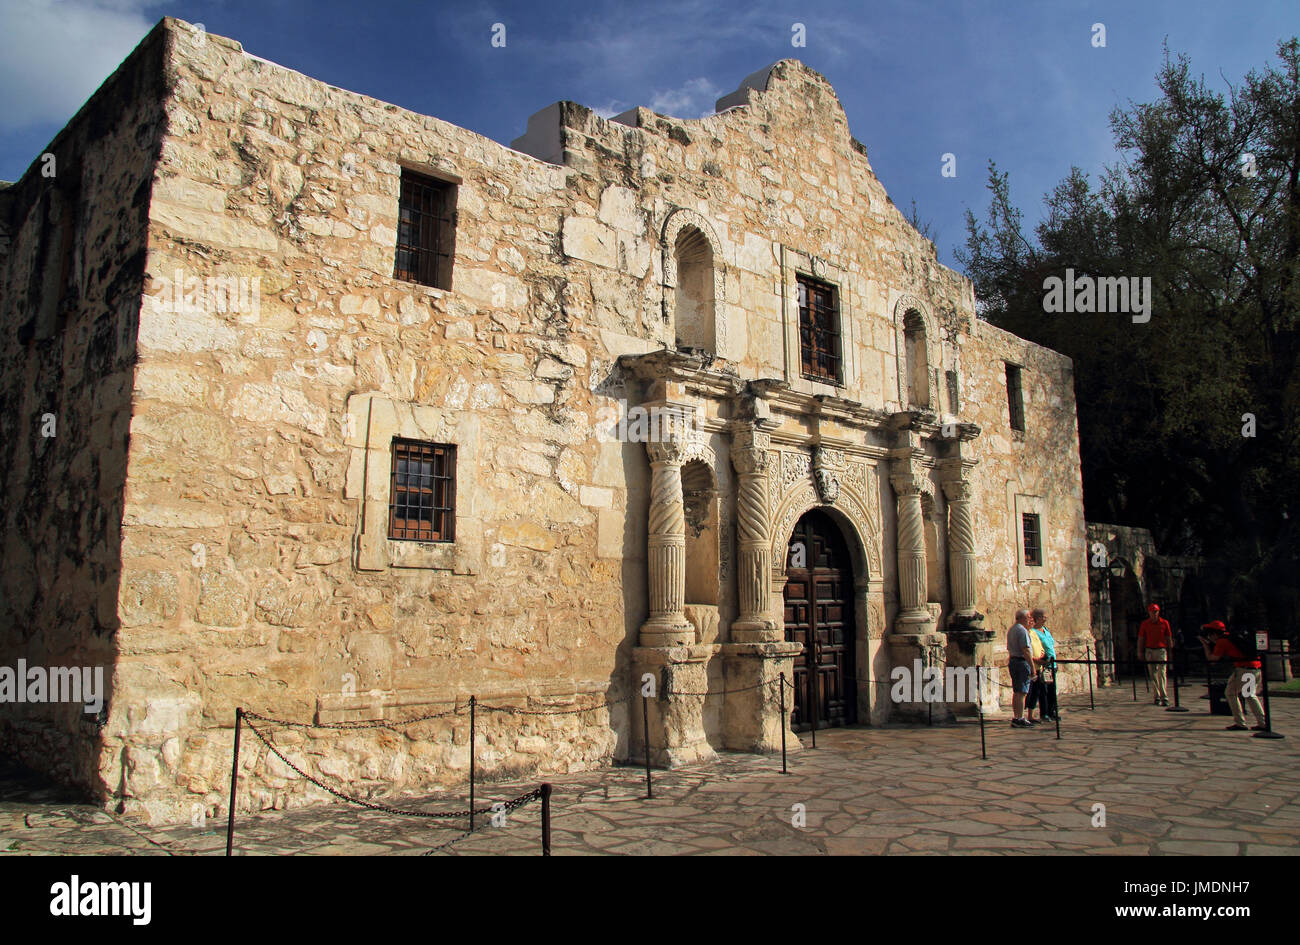 SAN ANTONIO, TX – FEBRUARY 27: Tourists and locals enjoy a visit to the old Alamo compound, one of San Antonio’s main attractions February 27, 2017 Stock Photo